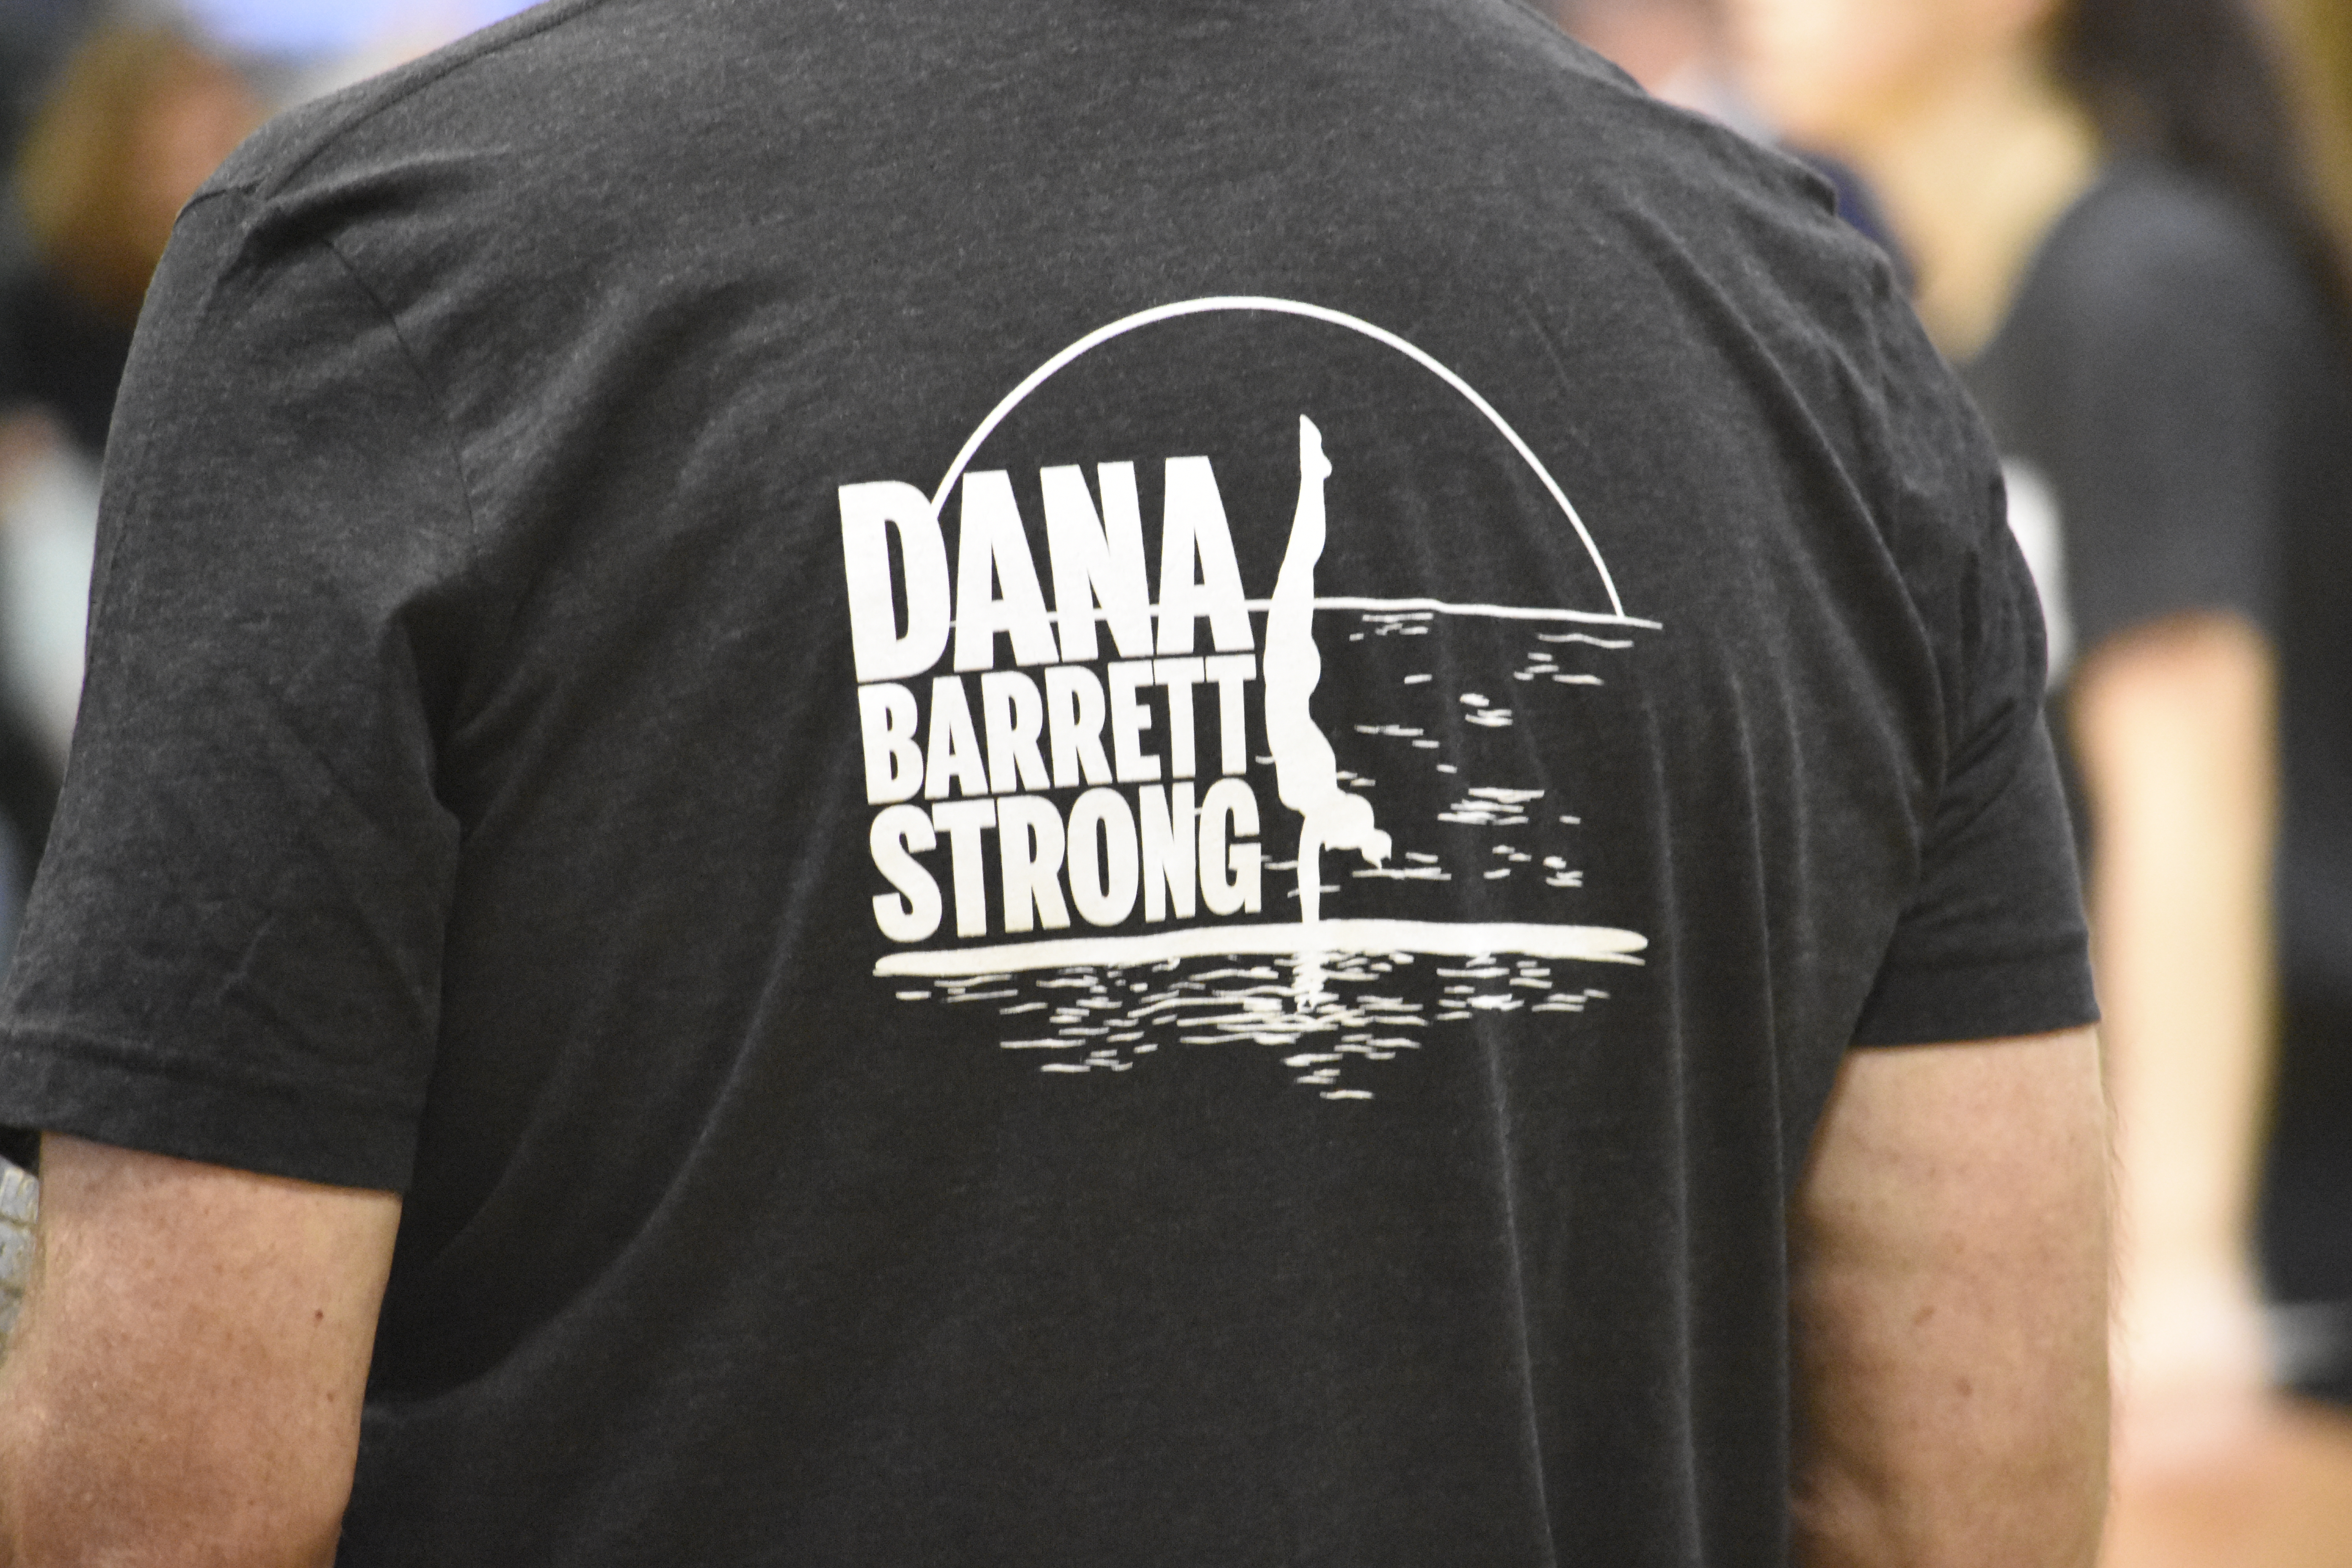 Friday's game was in support of Dana Barrett, a Westhampton Beach graduate who suffered a C2 fracture of her spine in a pool accident, resulting in paralysis from the neck down and the inability to breathe on her own.